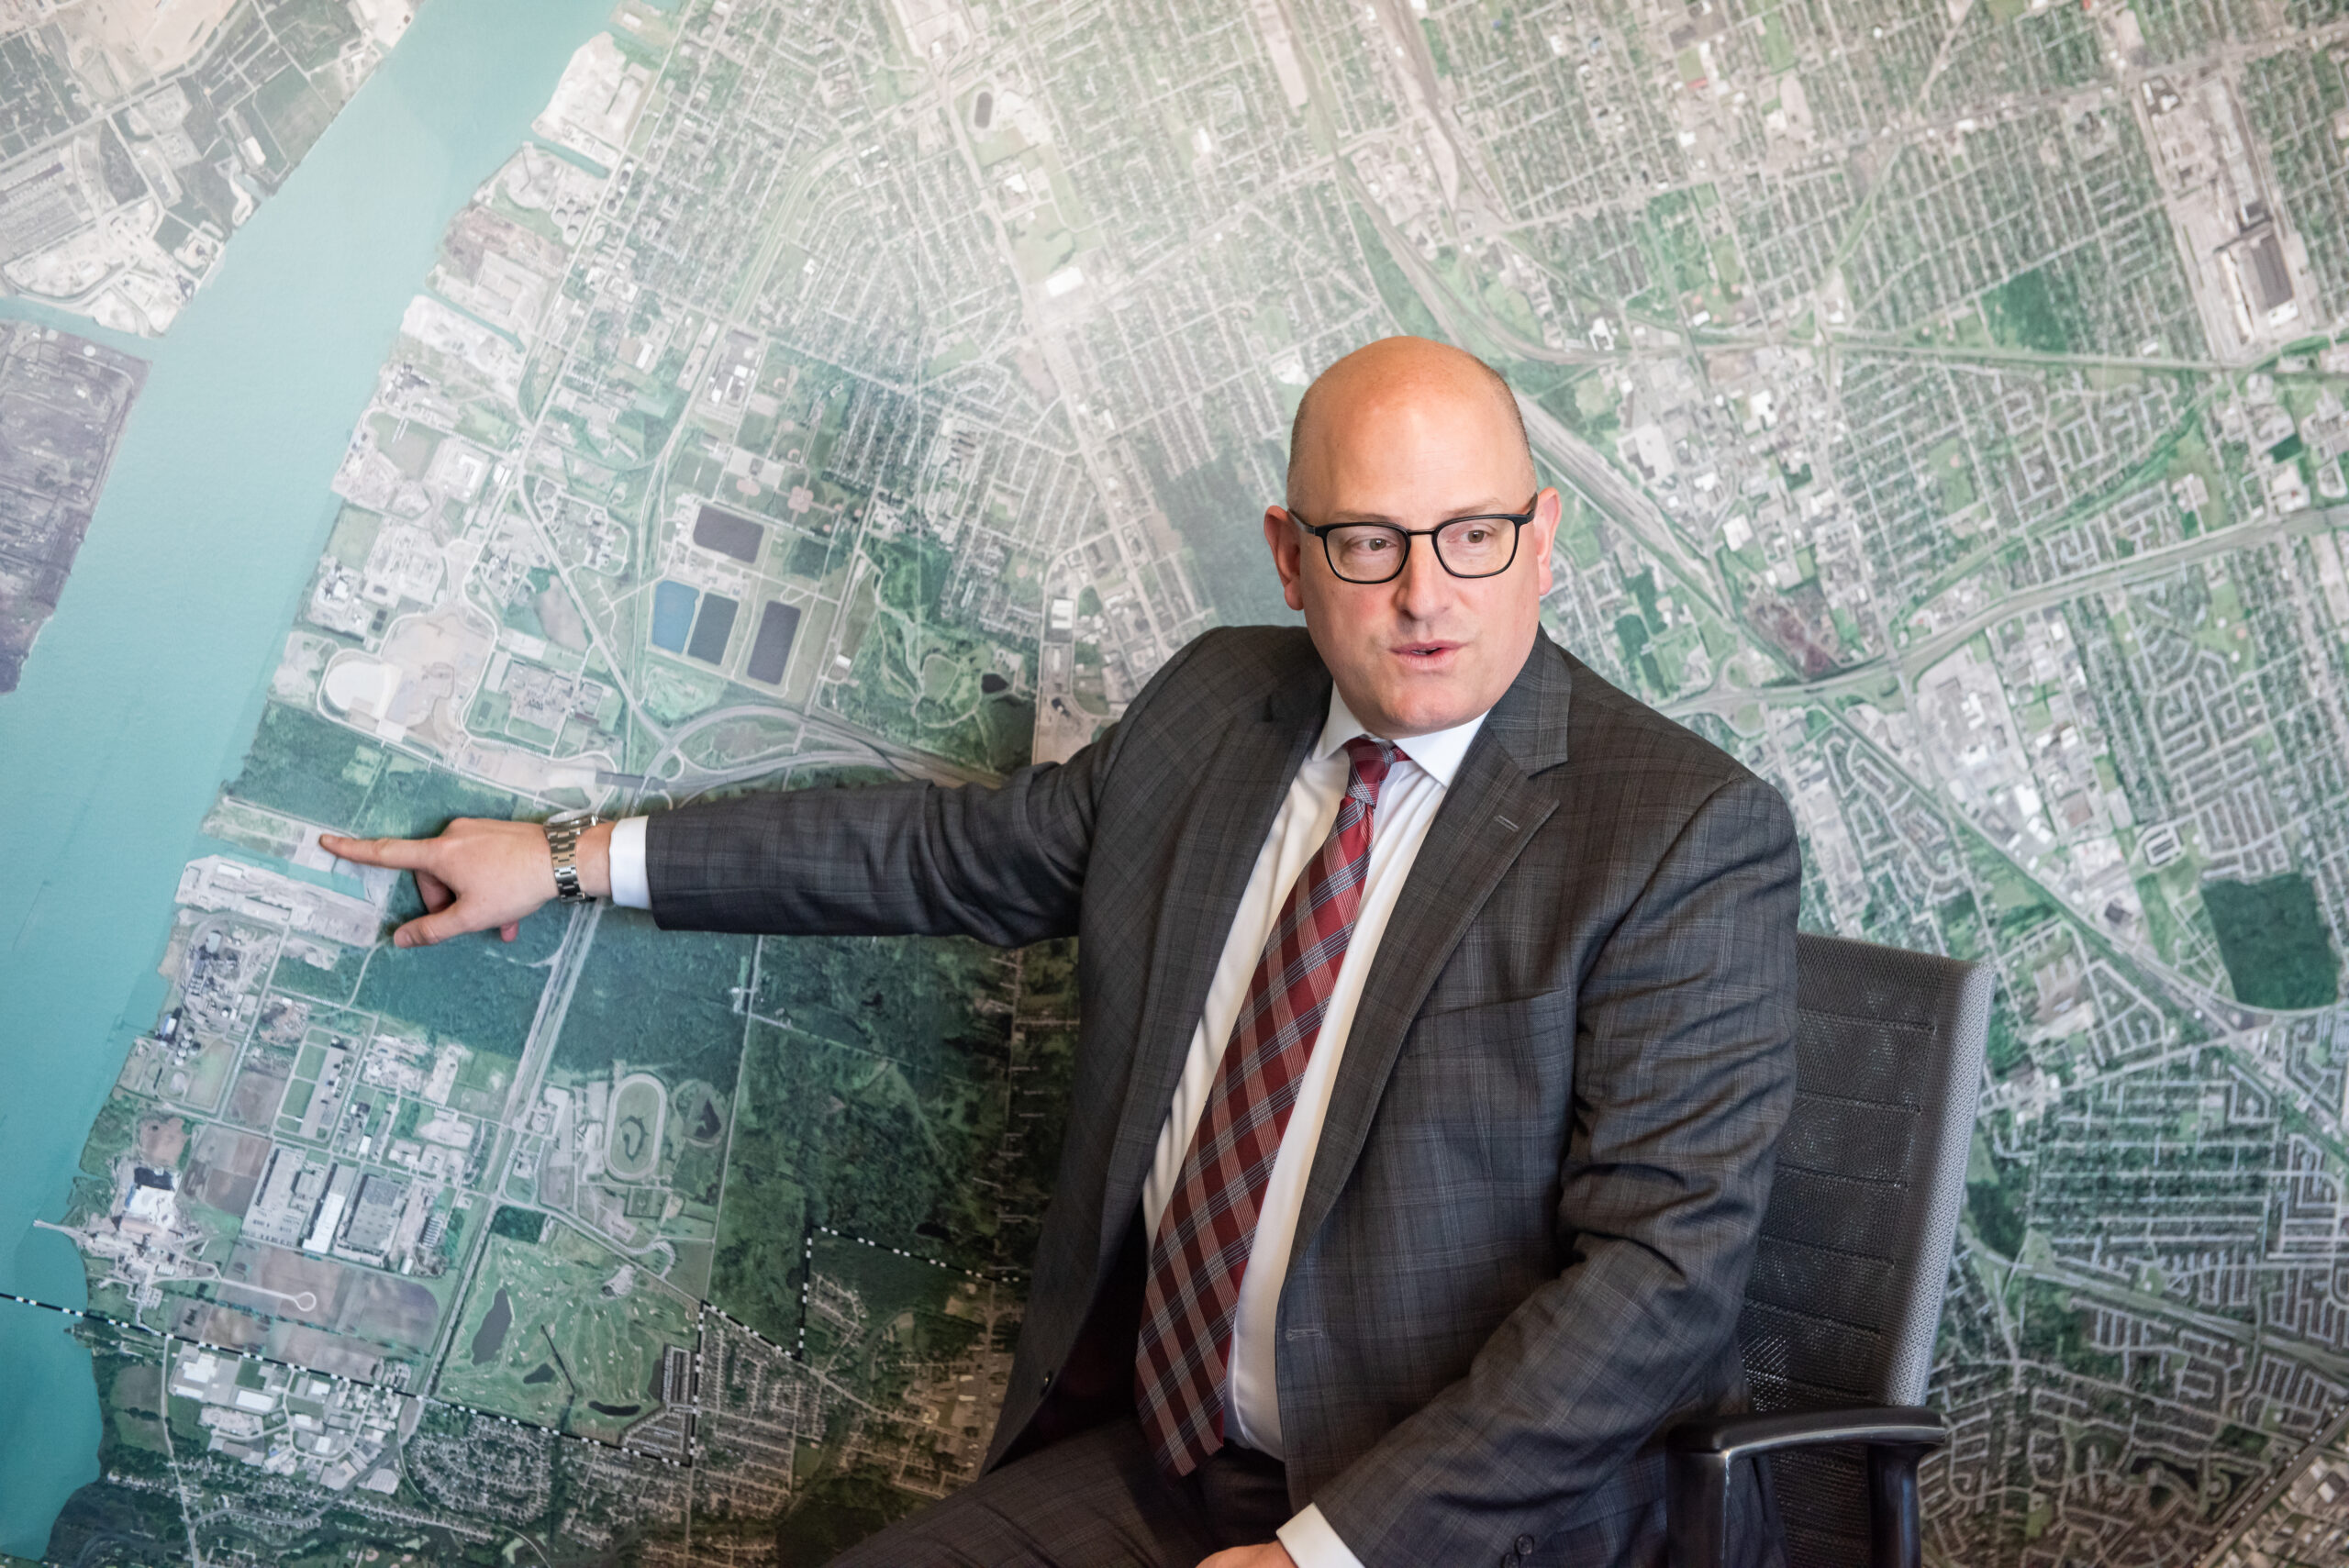 Windsor Mayor Drew Dilkens points at Ojibway Shores on a map of the region in his office